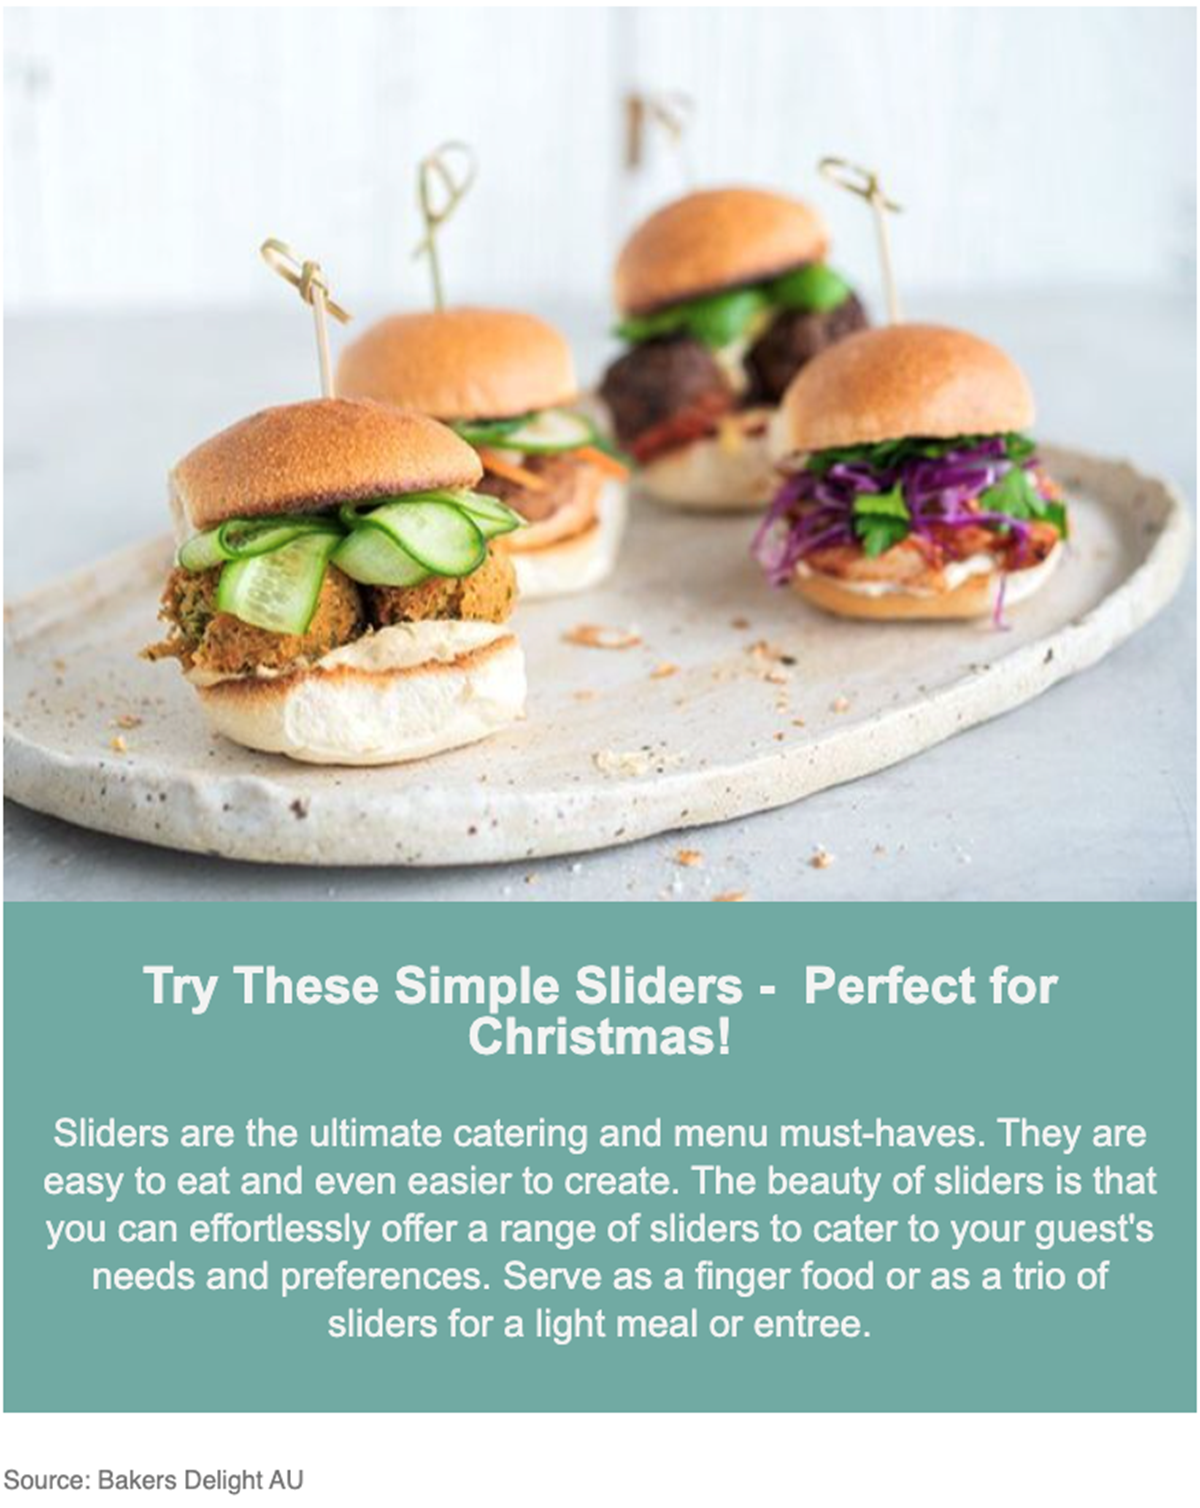 3 Easy Slider Recipes- Try These Simple Sliders - Perfect for Christmas!